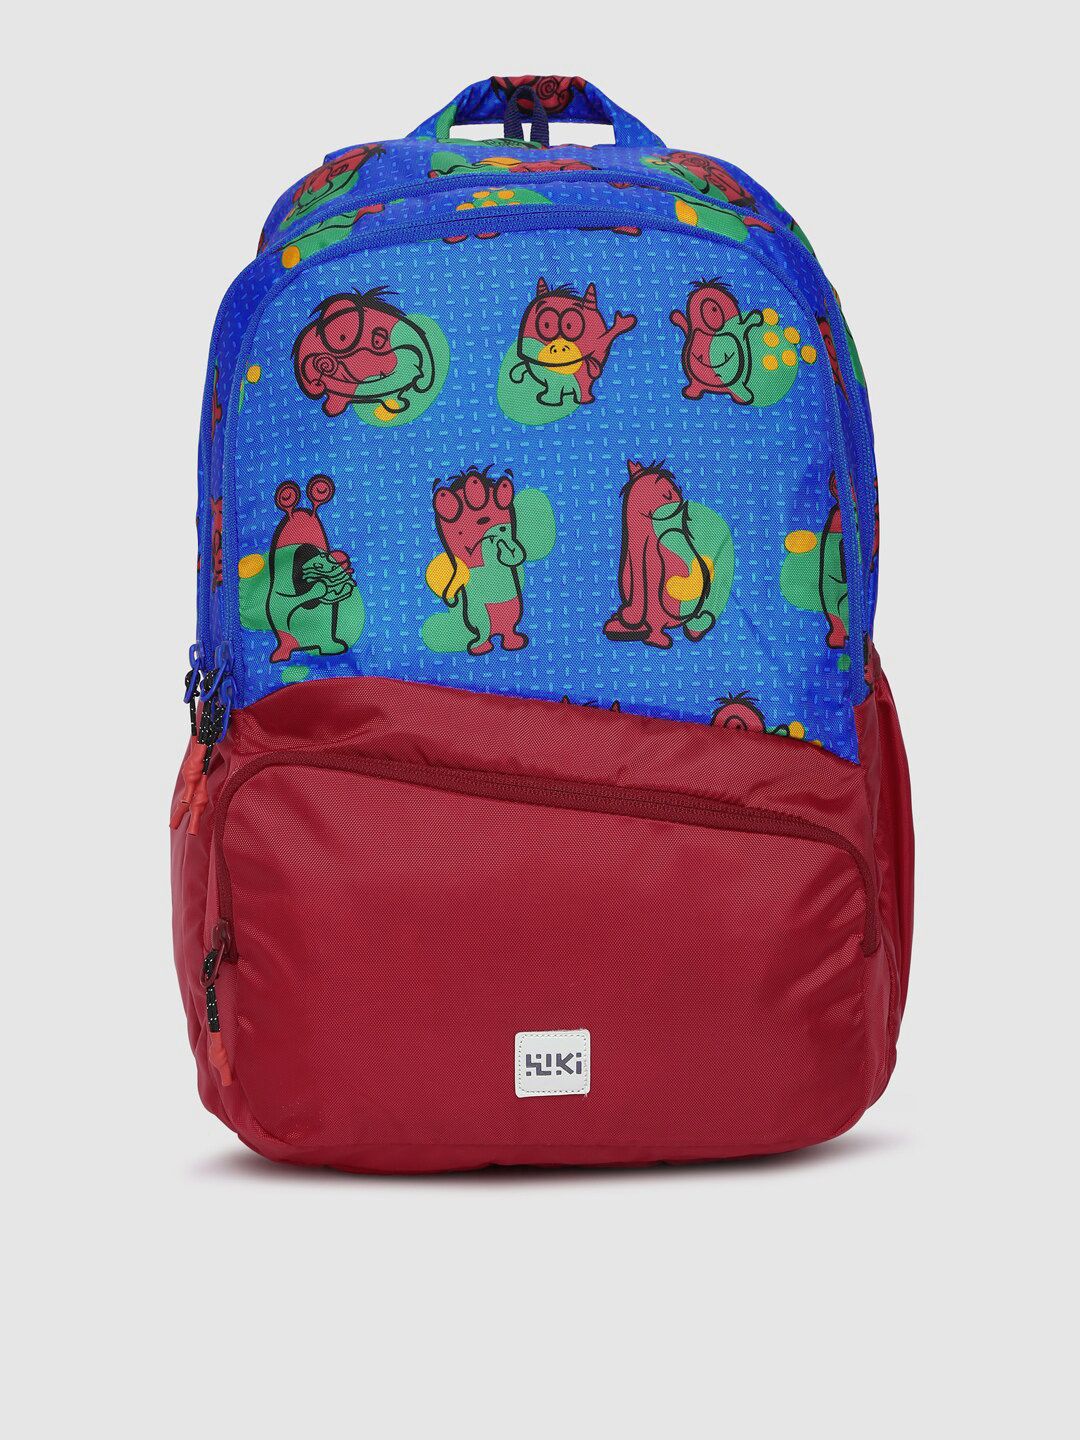 Wildcraft Unisex Blue & Red Graphic Backpack Price in India